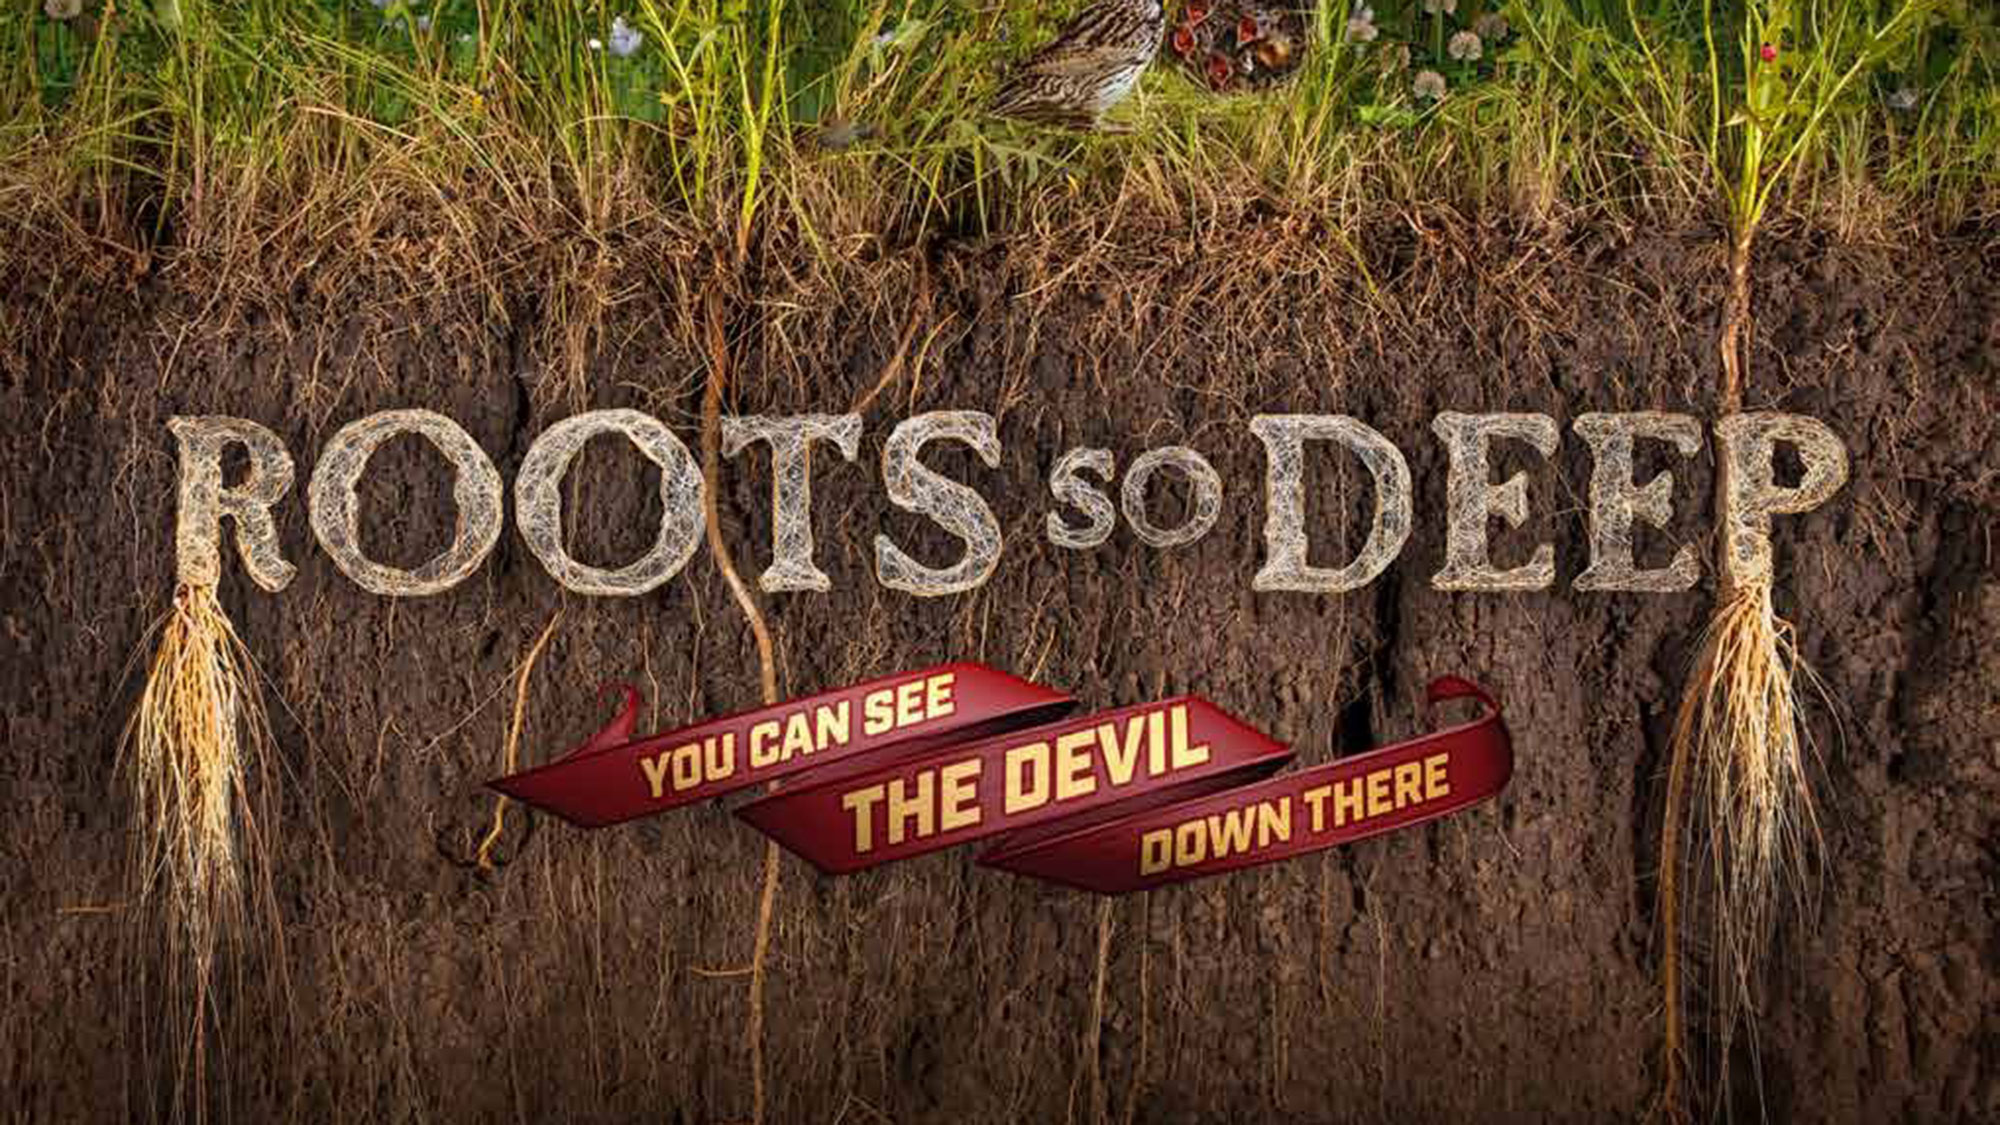 The UNL Soils Judging Team is sponsoring a “Roots So Deep” screening at 6 p.m. in Hardin Hall on East Campus.